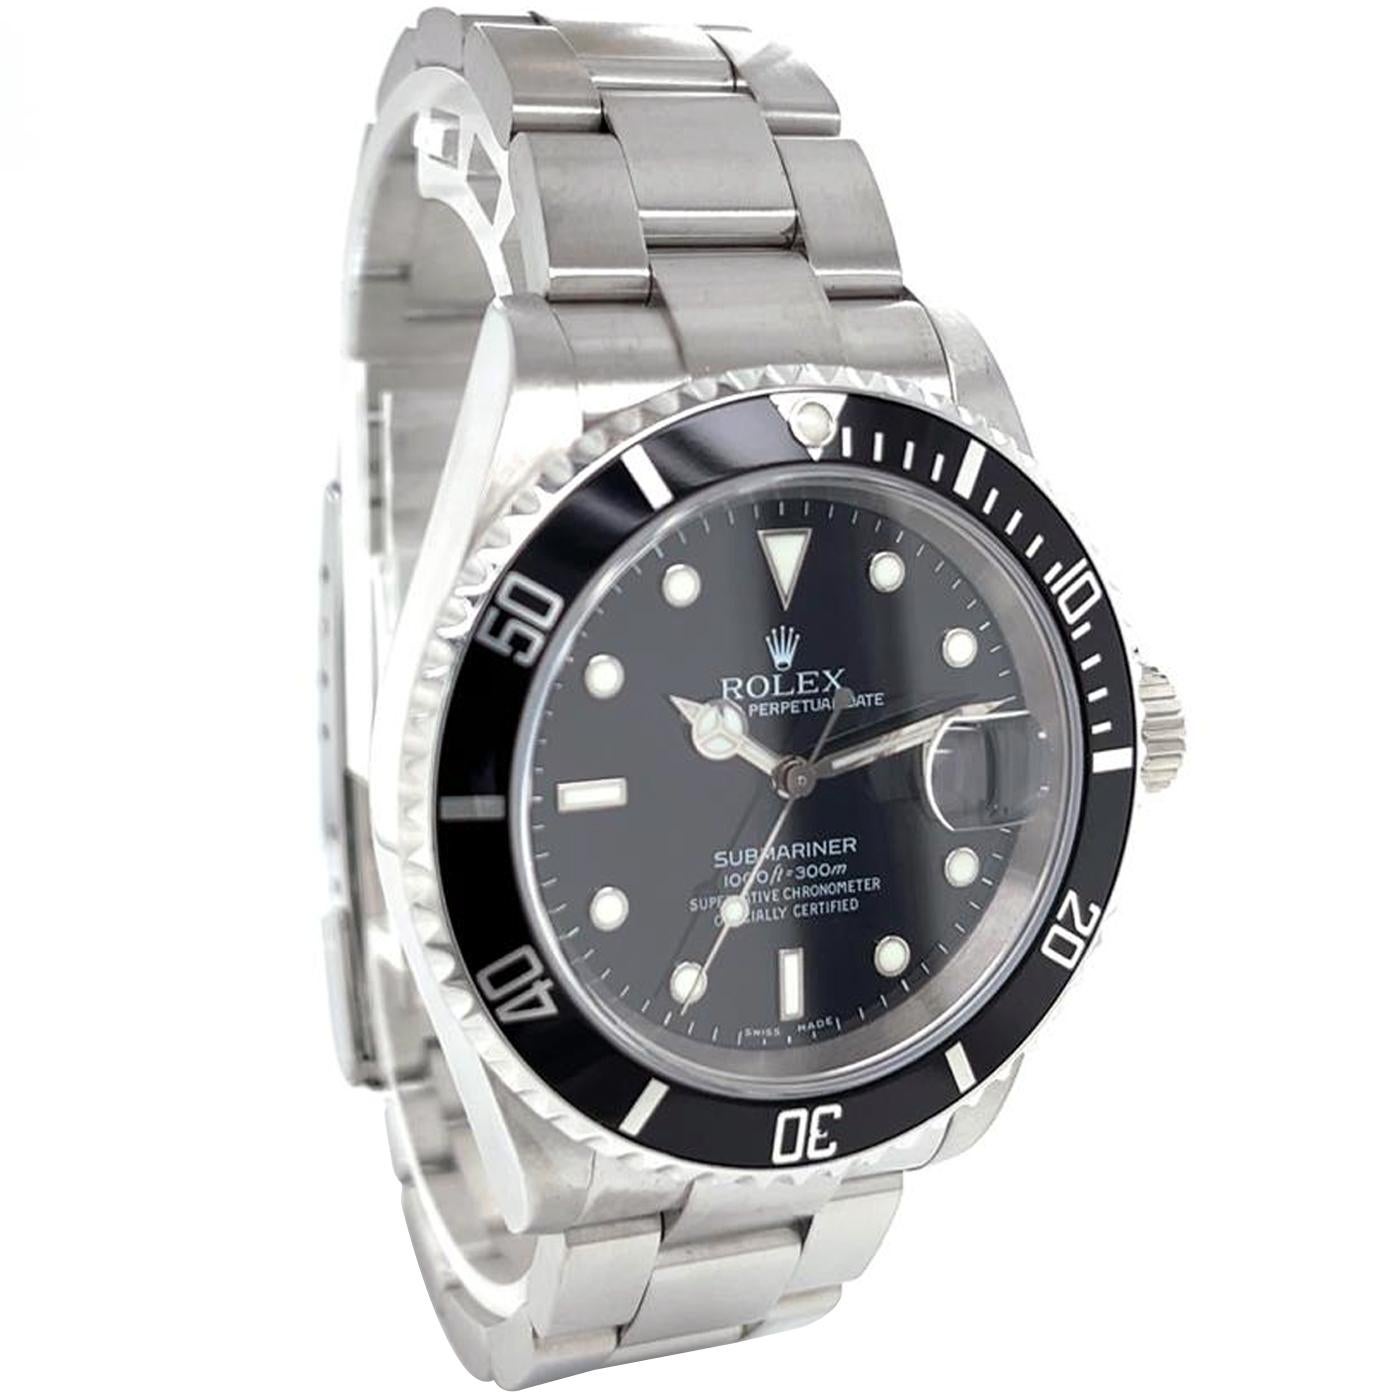 Rolex Submariner Black Dial Stainless Steel Oyster Mens Watch 16610 For Sale 2